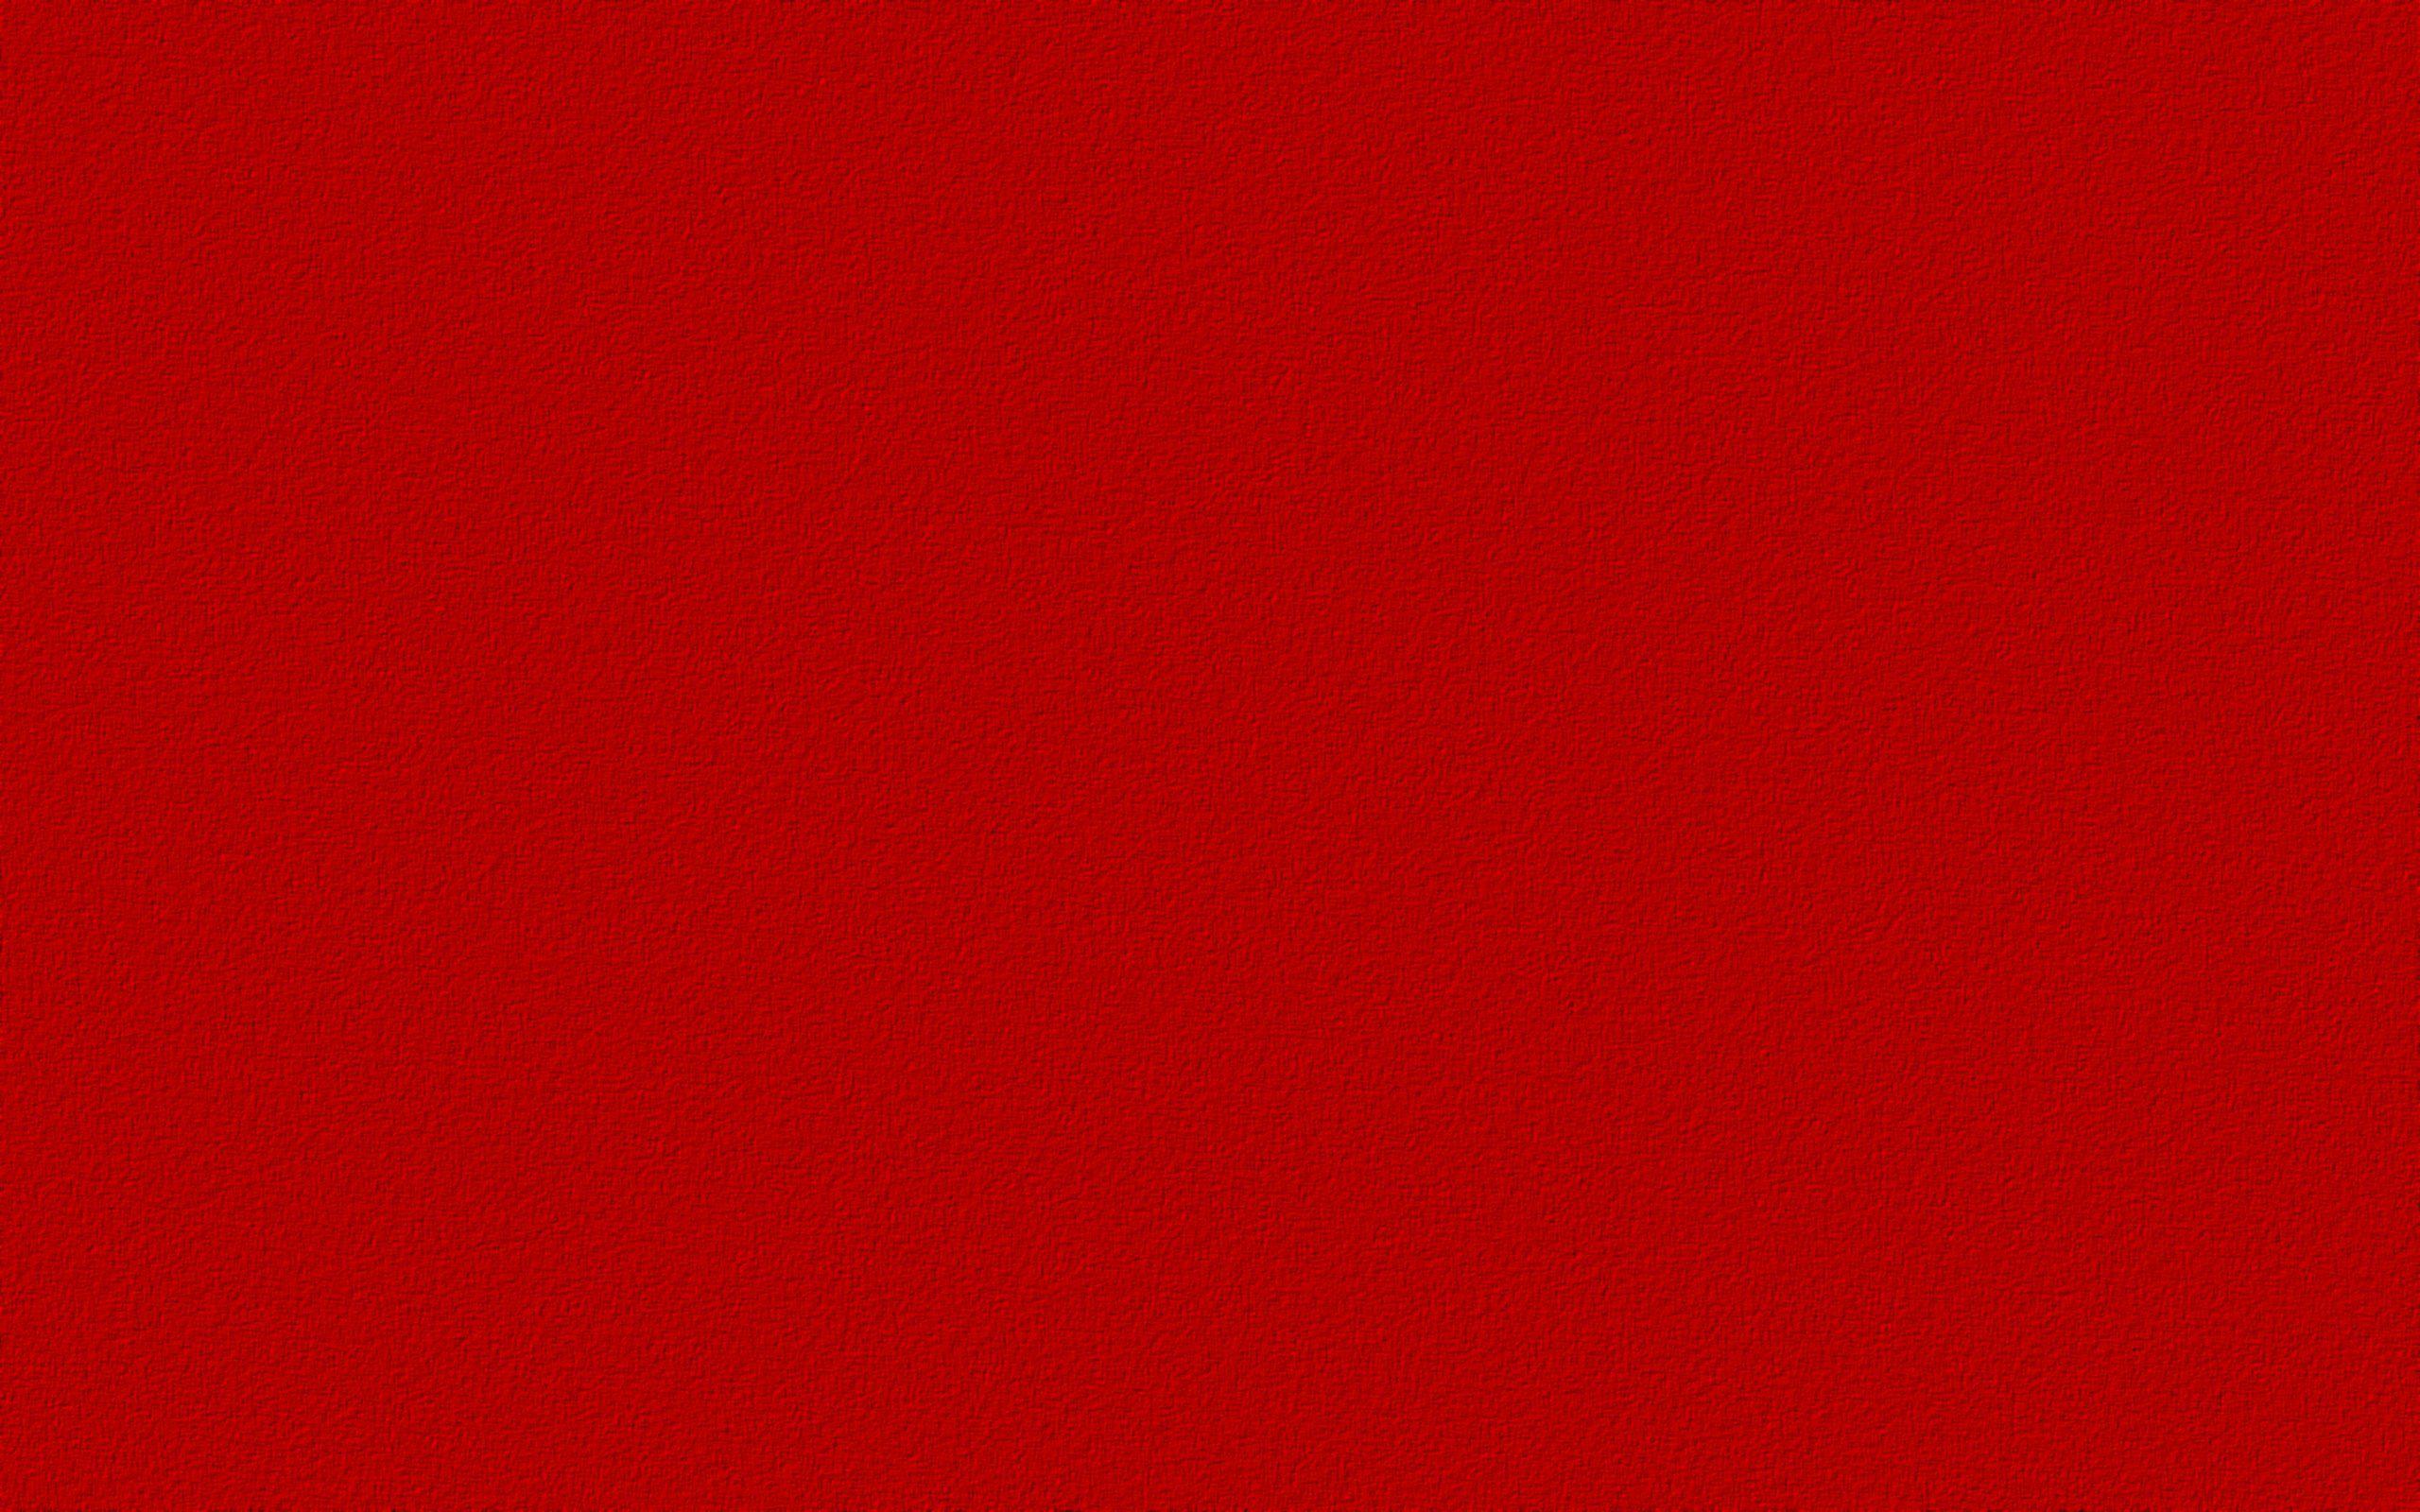 Plain Red Wallpapers HD - Wallpaper Cave